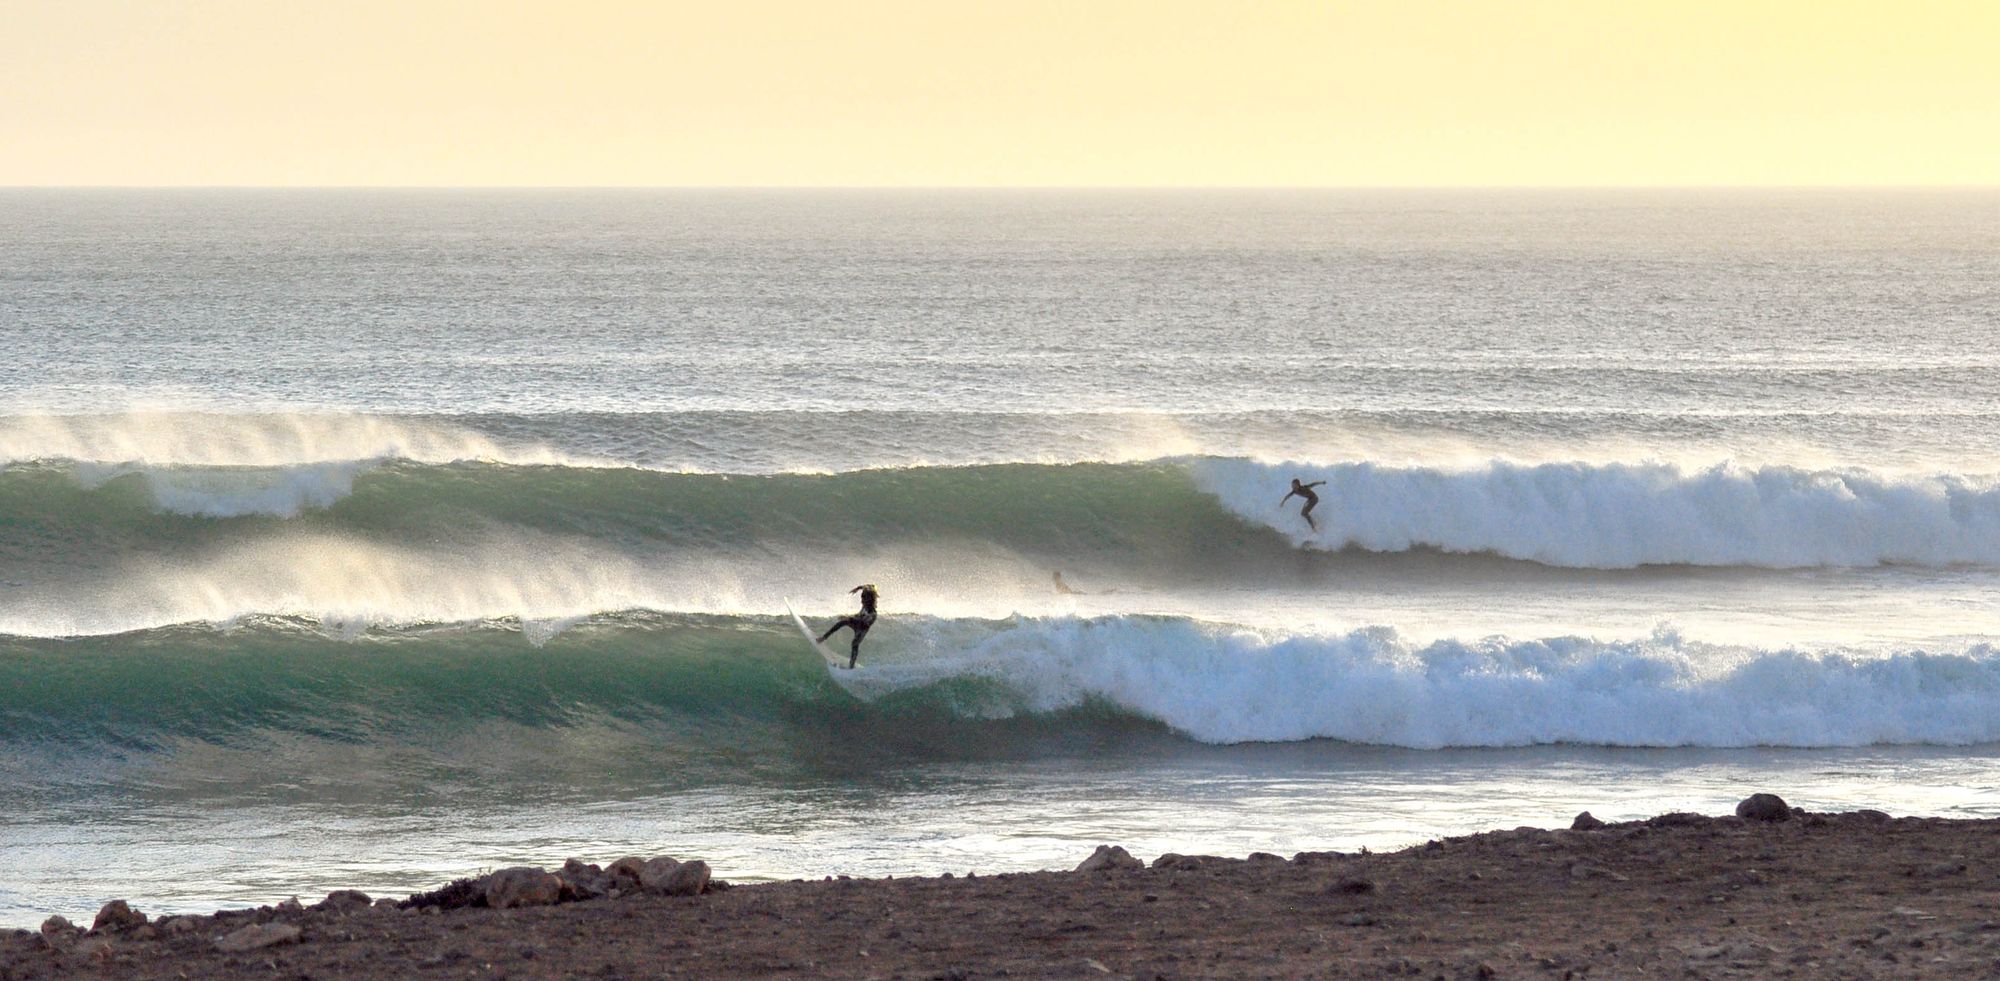 Chasing the Swell: Learning to Surf Morocco’s Waves